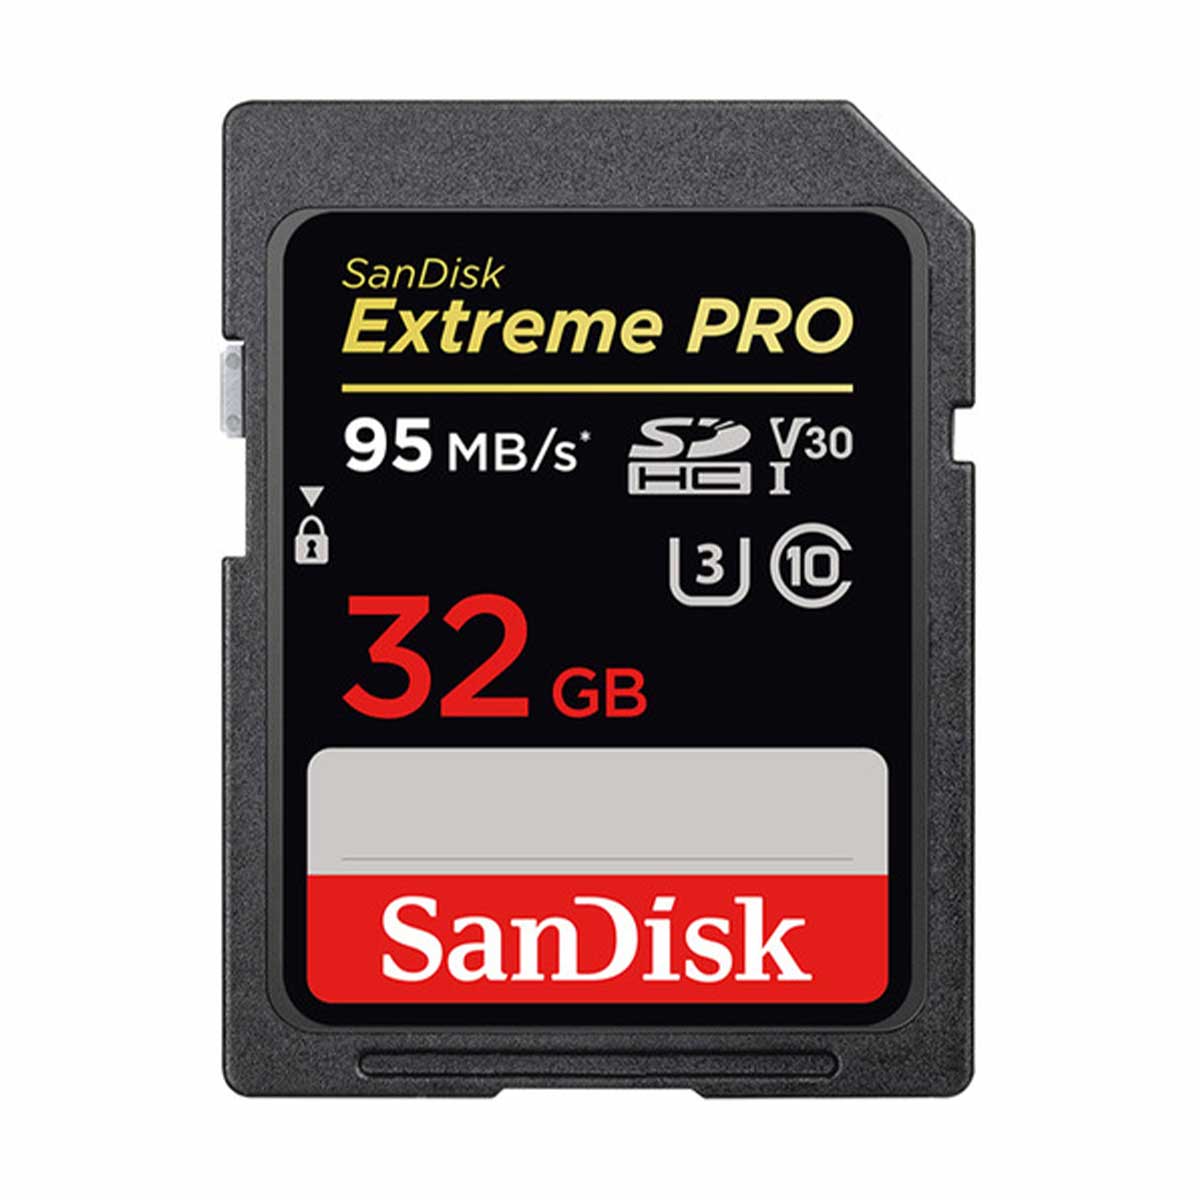 SanDisk 32GB Extreme PRO UHS-I SDHC Memory Card 95 MB/s